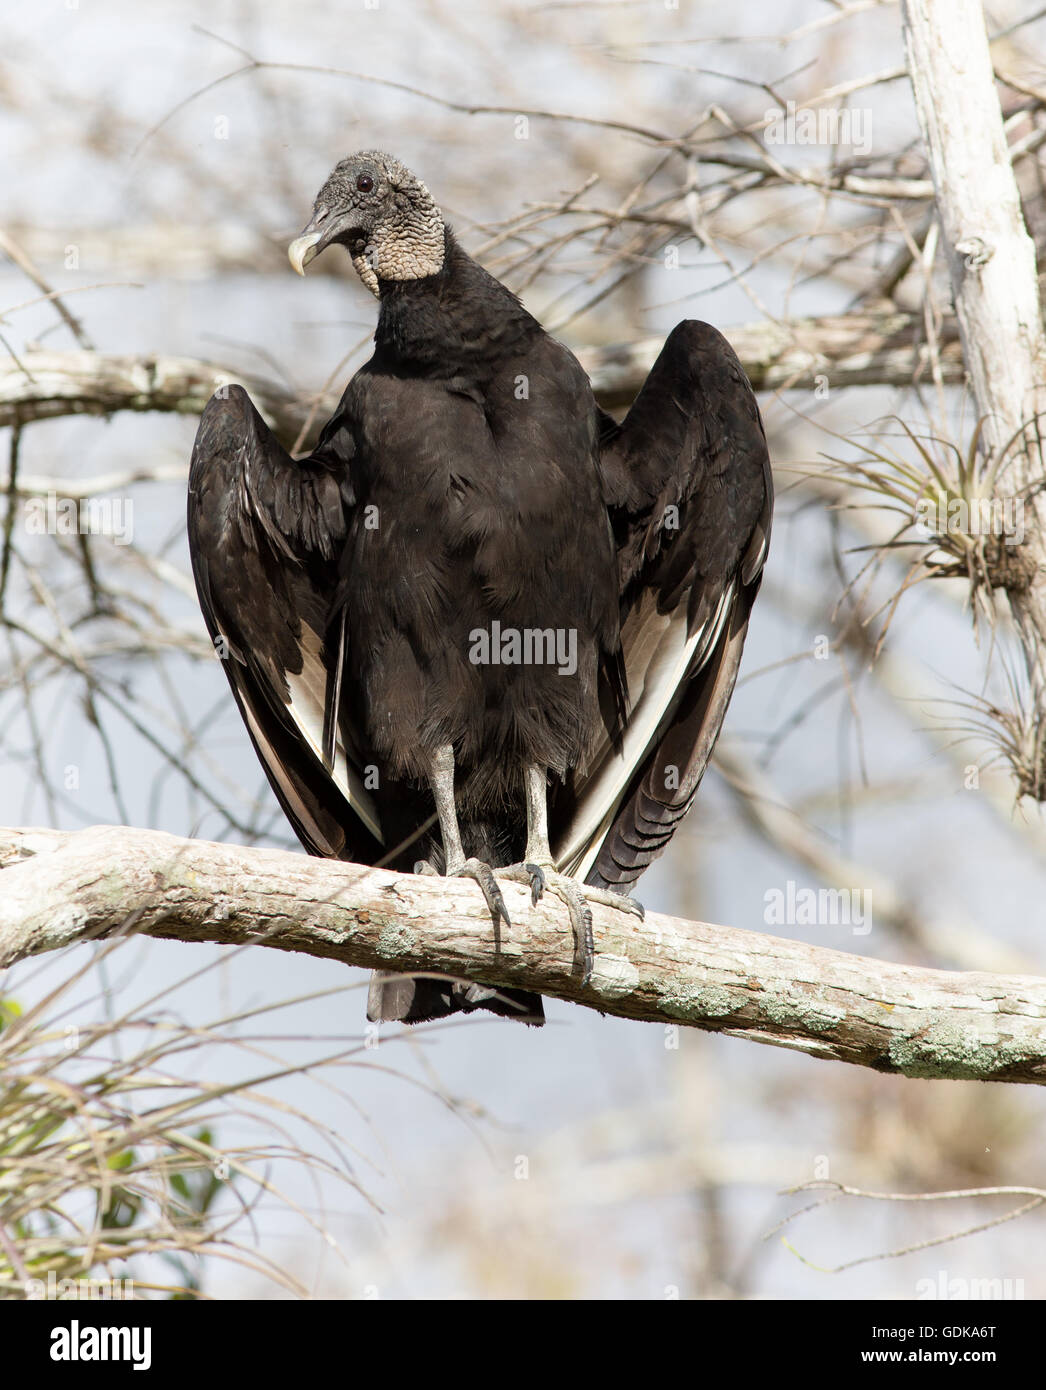 Black Vulture in wing spread posture on cypress limb at Florida's Big Cypress Preserve. The bird appears wary but curious too. Stock Photo